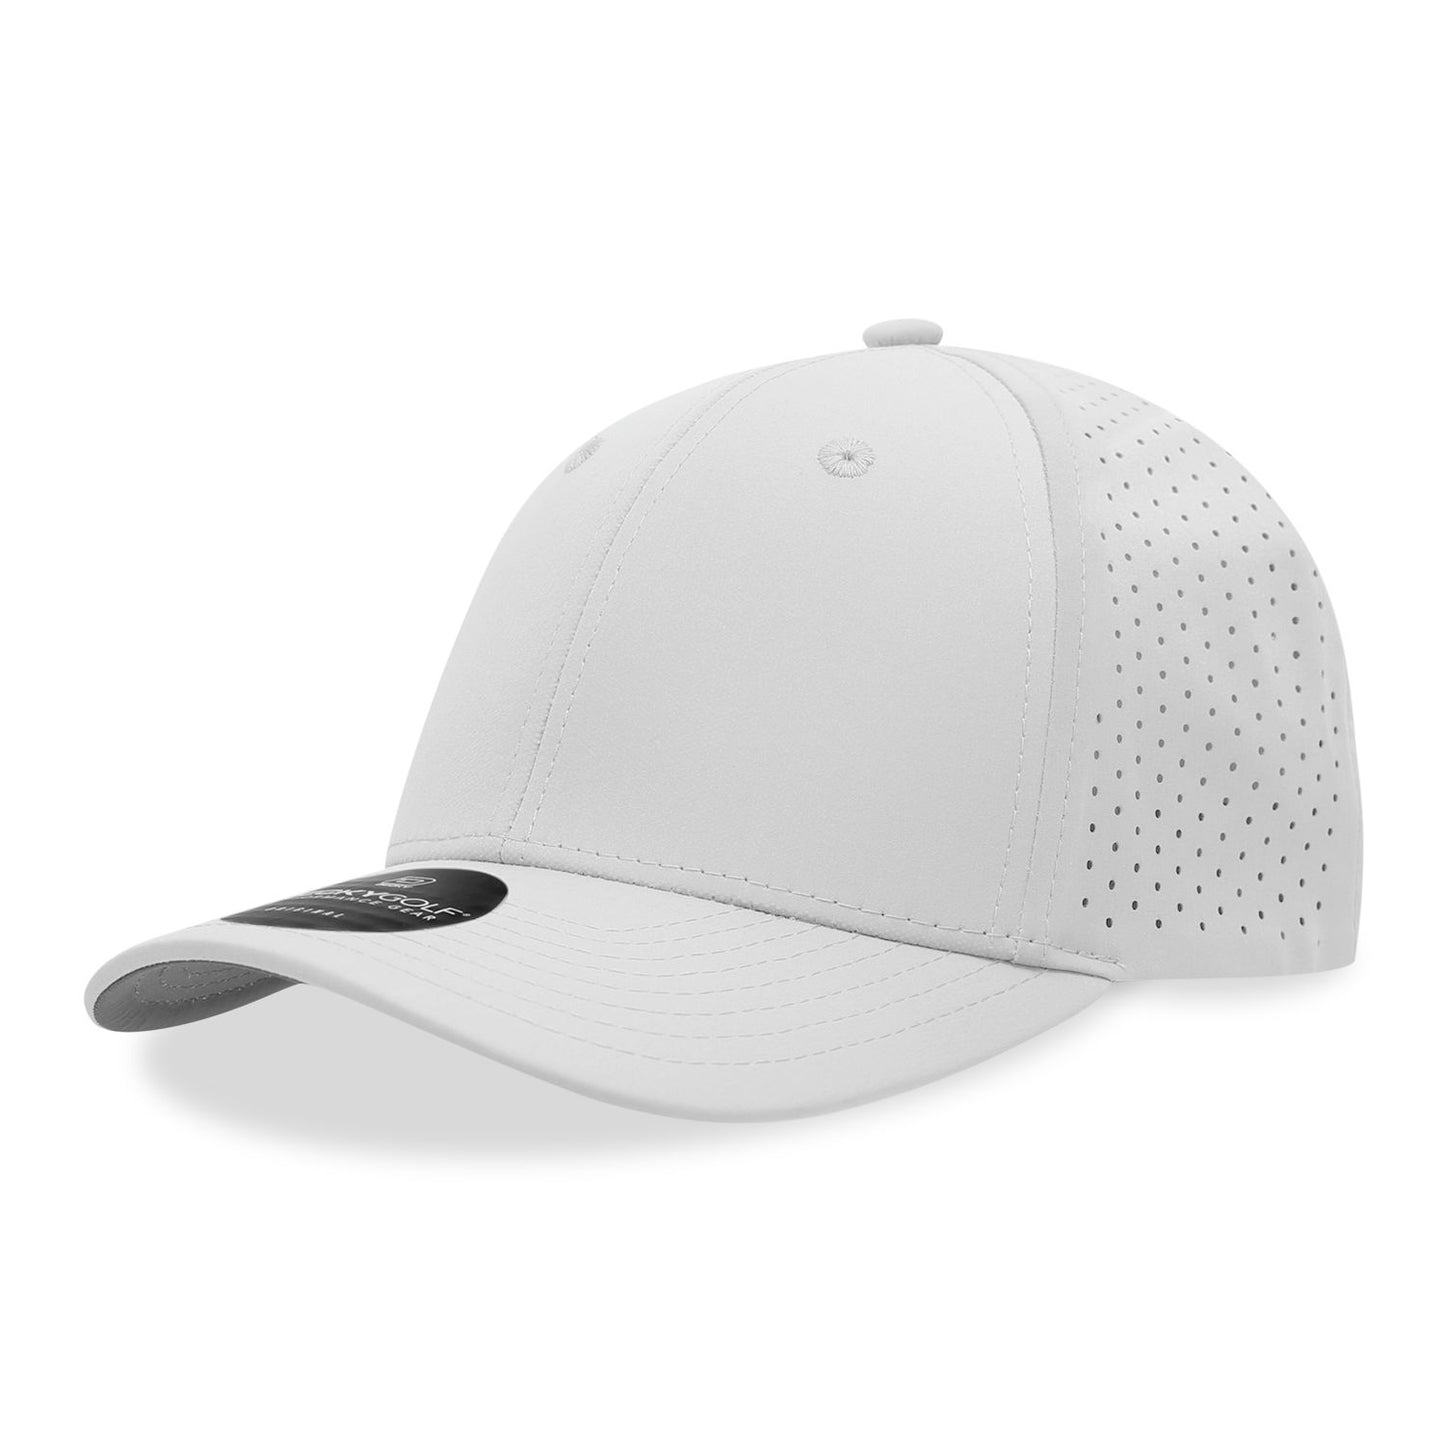 Decky 6412 6 Panel Mid Prof Perforated Cap - Blank